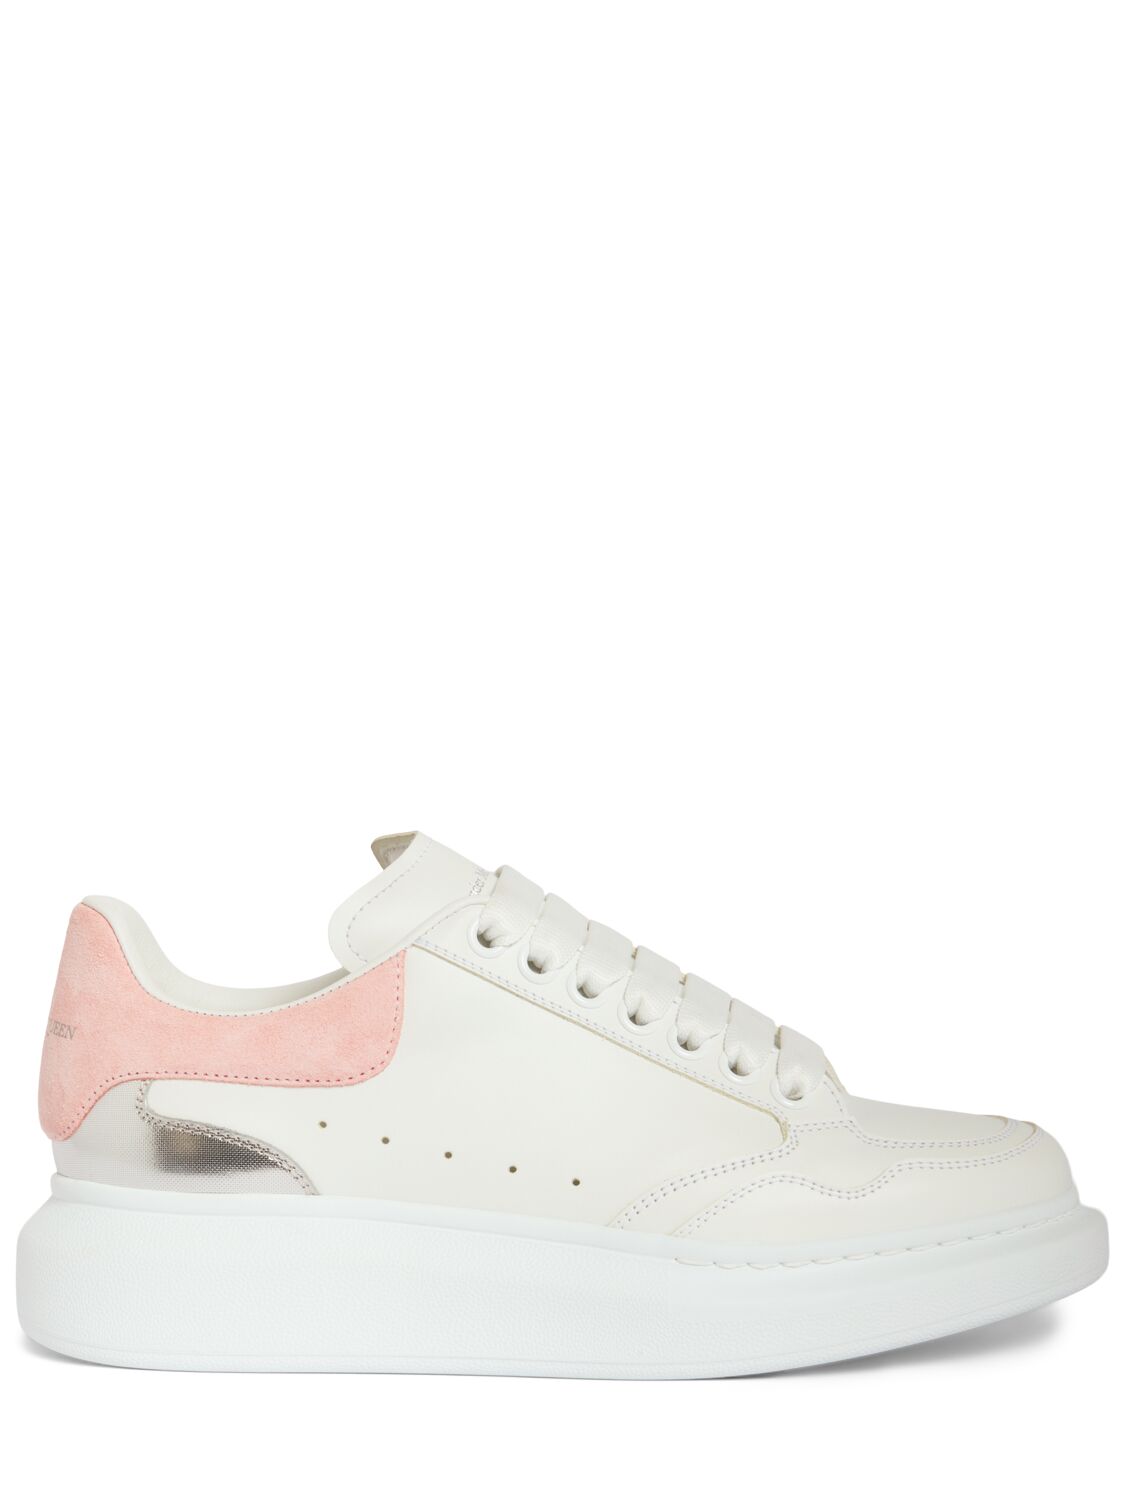 Alexander Mcqueen 45mm Leather Sneakers In White/pink